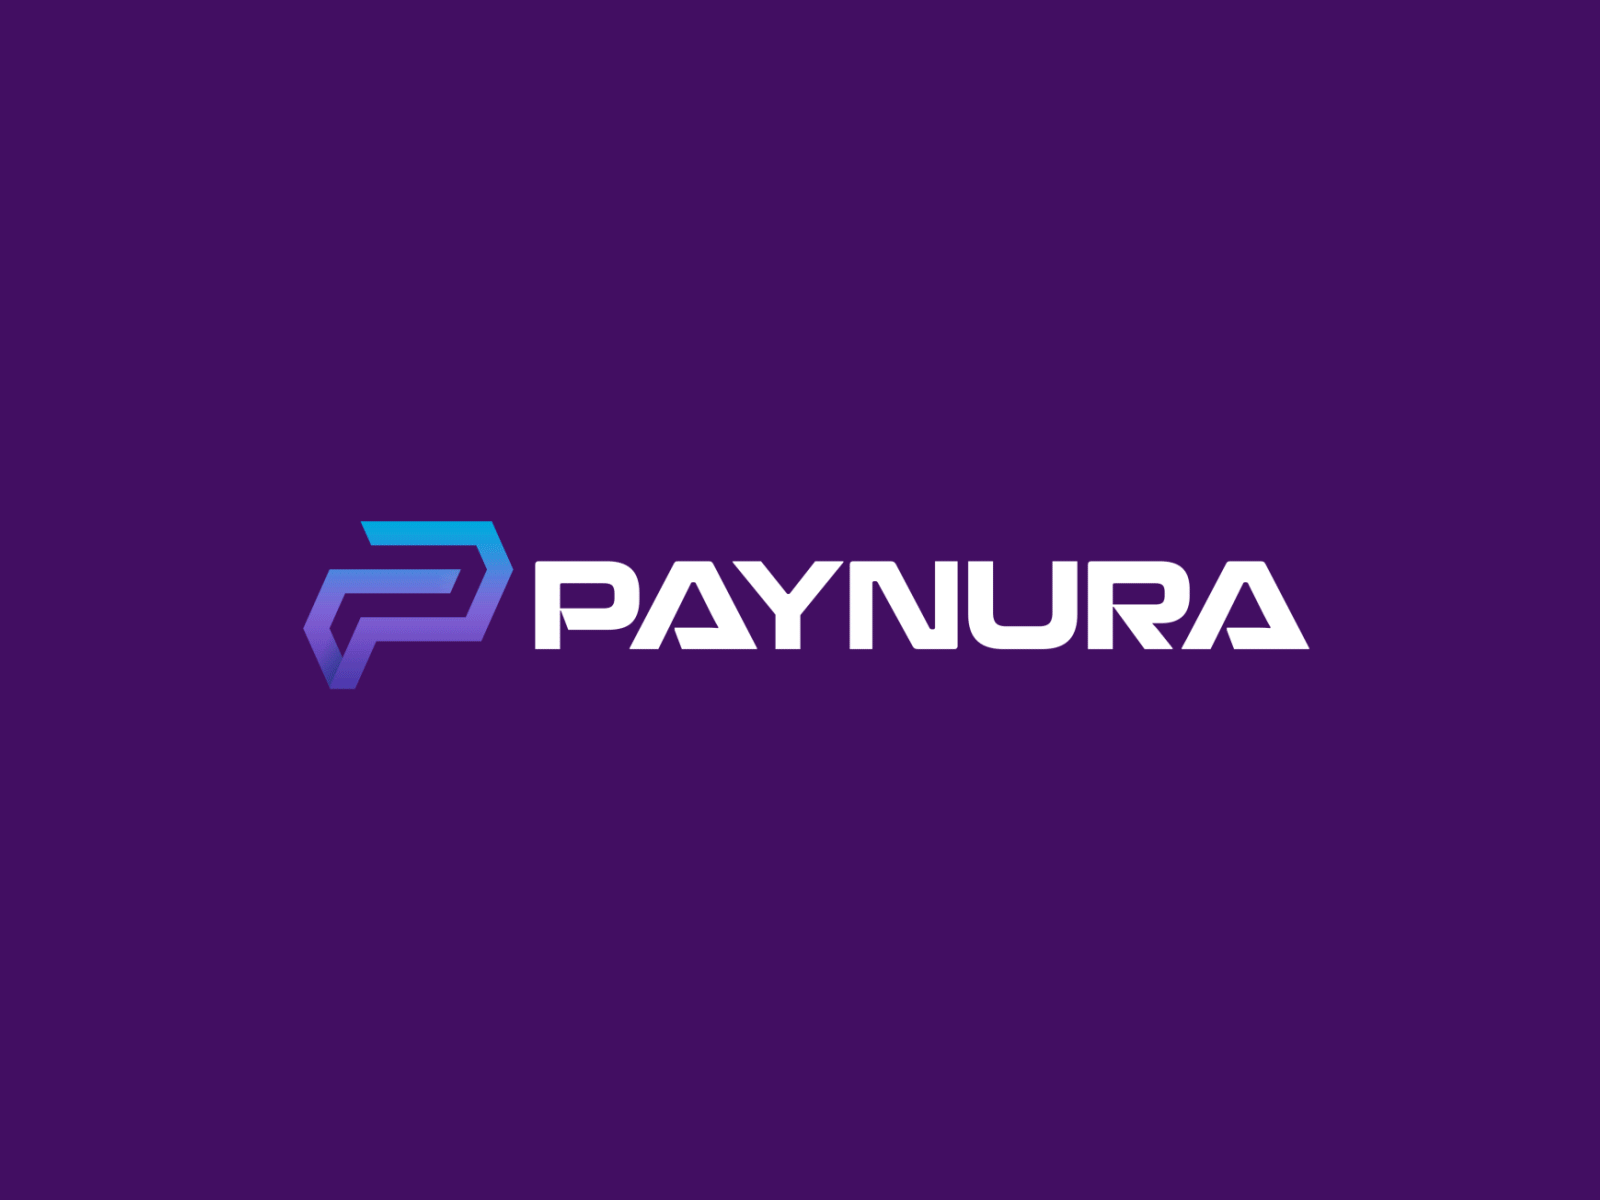 "PAYNURA" logo motion 2d after effect aftereffects animated design icon illustration logo logoanimation morph motion motion design pay paypal ui